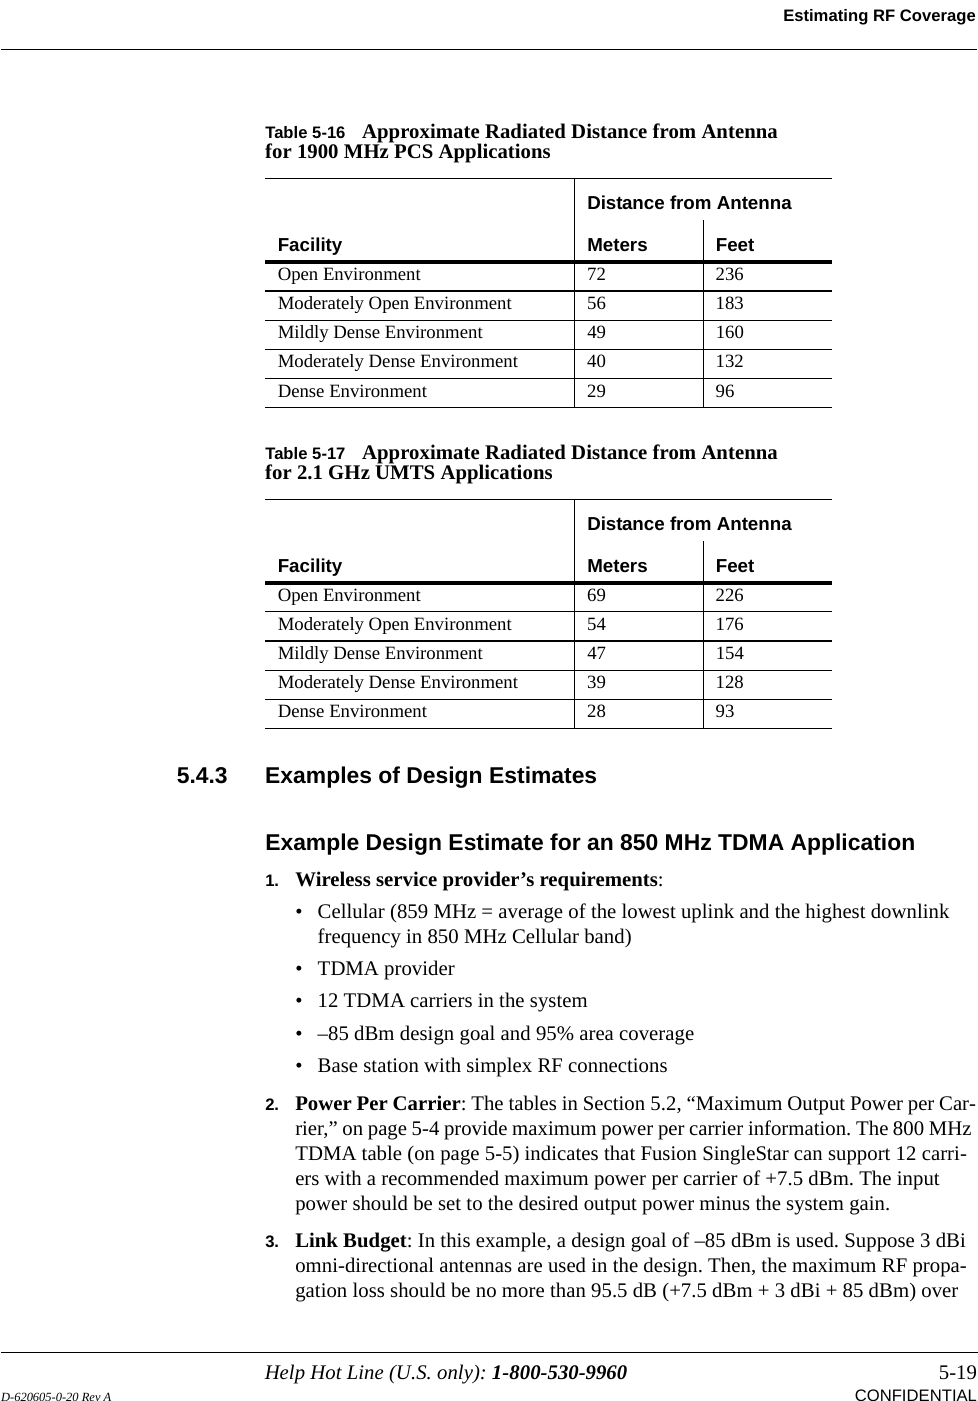 Help Hot Line (U.S. only): 1-800-530-9960 5-19D-620605-0-20 Rev A CONFIDENTIALEstimating RF Coverage5.4.3 Examples of Design EstimatesExample Design Estimate for an 850 MHz TDMA Application1. Wireless service provider’s requirements:• Cellular (859 MHz = average of the lowest uplink and the highest downlink frequency in 850 MHz Cellular band)•TDMA provider• 12 TDMA carriers in the system• –85 dBm design goal and 95% area coverage• Base station with simplex RF connections2. Power Per Carrier: The tables in Section 5.2, “Maximum Output Power per Car-rier,” on page 5-4 provide maximum power per carrier information. The 800 MHz TDMA table (on page 5-5) indicates that Fusion SingleStar can support 12 carri-ers with a recommended maximum power per carrier of +7.5 dBm. The input power should be set to the desired output power minus the system gain.3. Link Budget: In this example, a design goal of –85 dBm is used. Suppose 3 dBi omni-directional antennas are used in the design. Then, the maximum RF propa-gation loss should be no more than 95.5 dB (+7.5 dBm + 3 dBi + 85 dBm) over Table 5-16 Approximate Radiated Distance from Antenna for 1900 MHz PCS ApplicationsFacilityDistance from AntennaMeters FeetOpen Environment 72 236Moderately Open Environment 56 183Mildly Dense Environment 49 160Moderately Dense Environment 40 132Dense Environment 29 96Table 5-17 Approximate Radiated Distance from Antenna for 2.1 GHz UMTS ApplicationsFacilityDistance from AntennaMeters FeetOpen Environment 69 226Moderately Open Environment 54 176Mildly Dense Environment 47 154Moderately Dense Environment 39 128Dense Environment 28 93